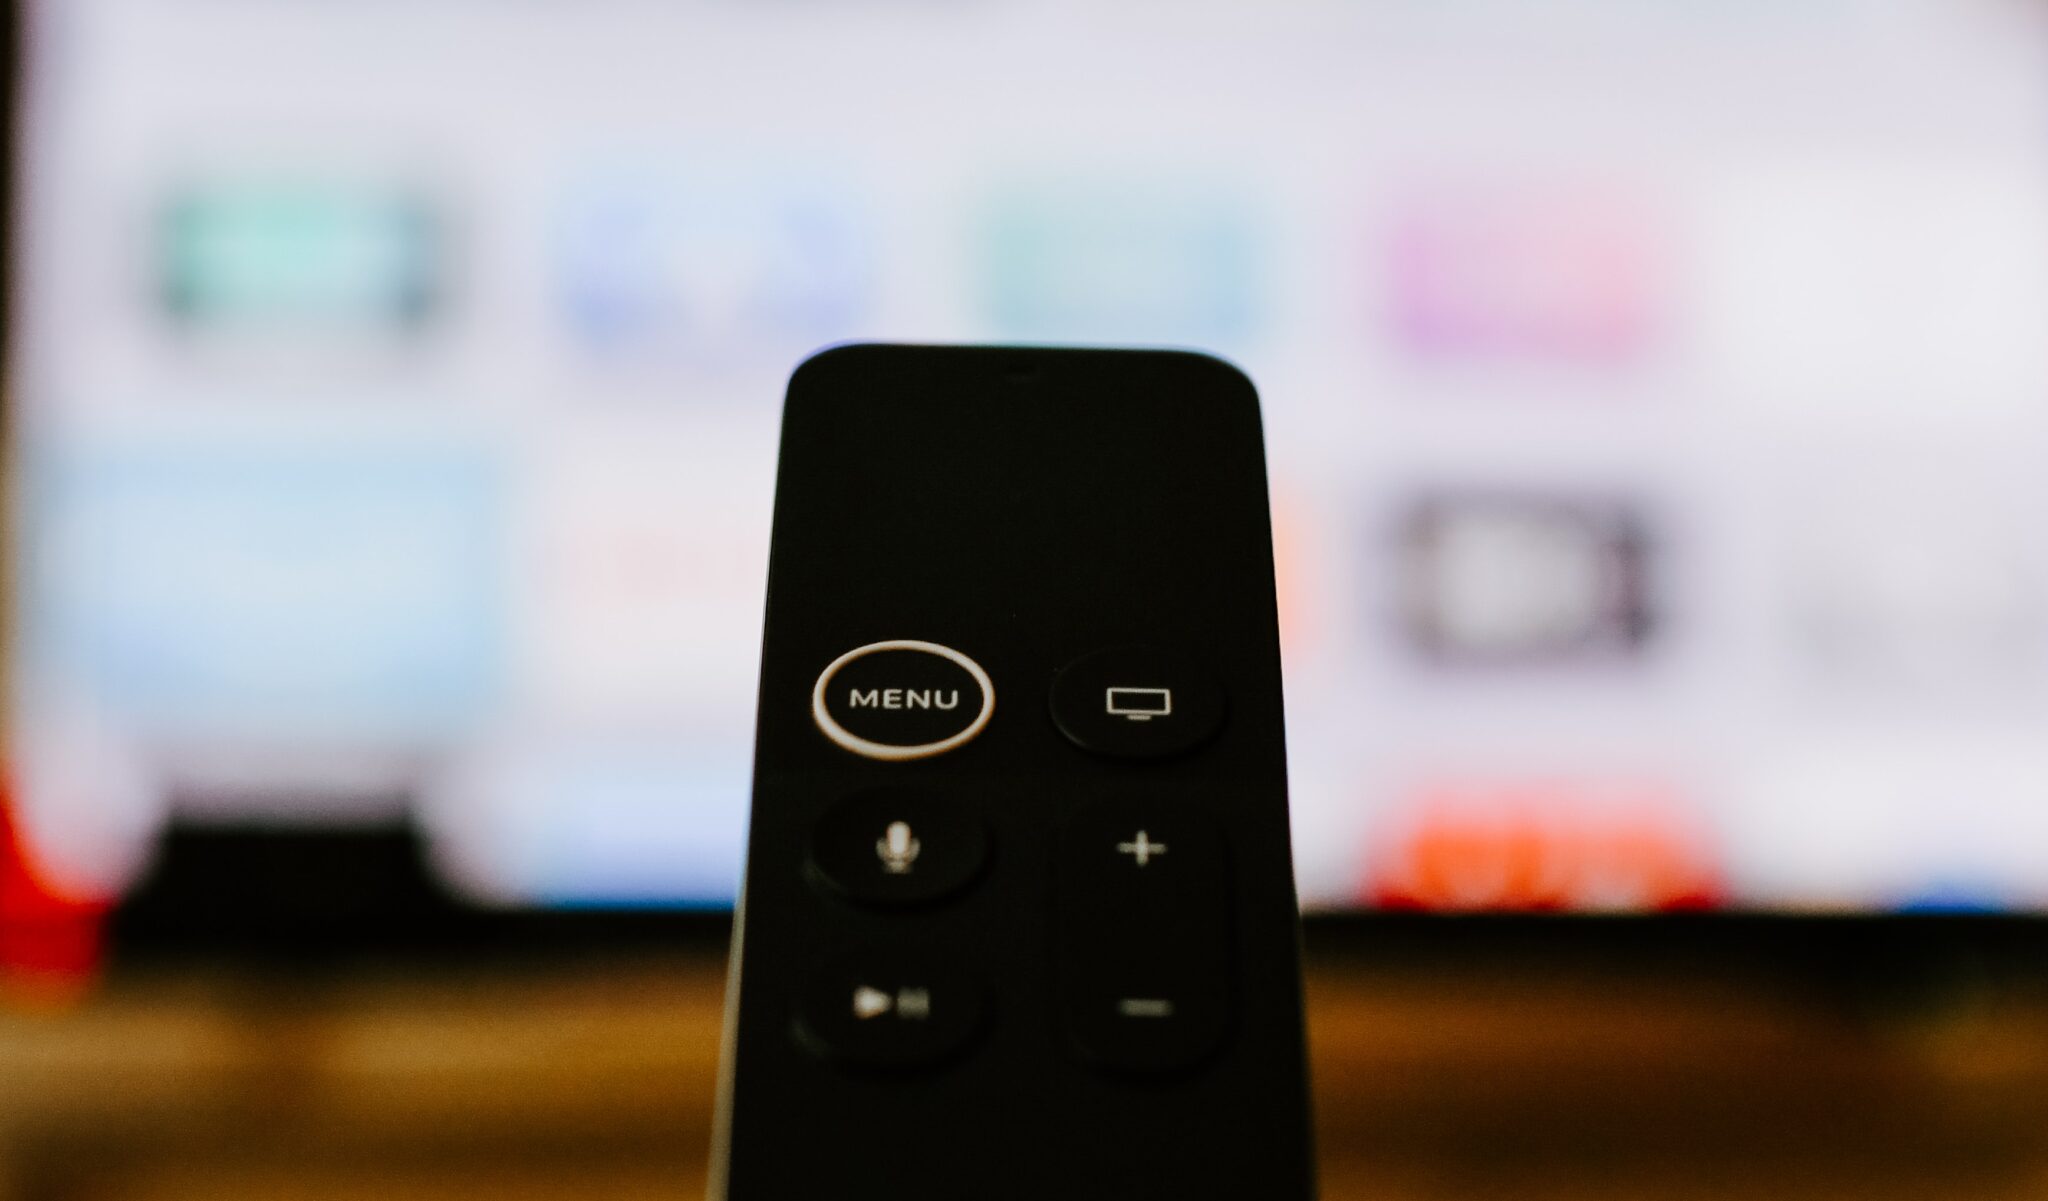 How to reset the remote control?